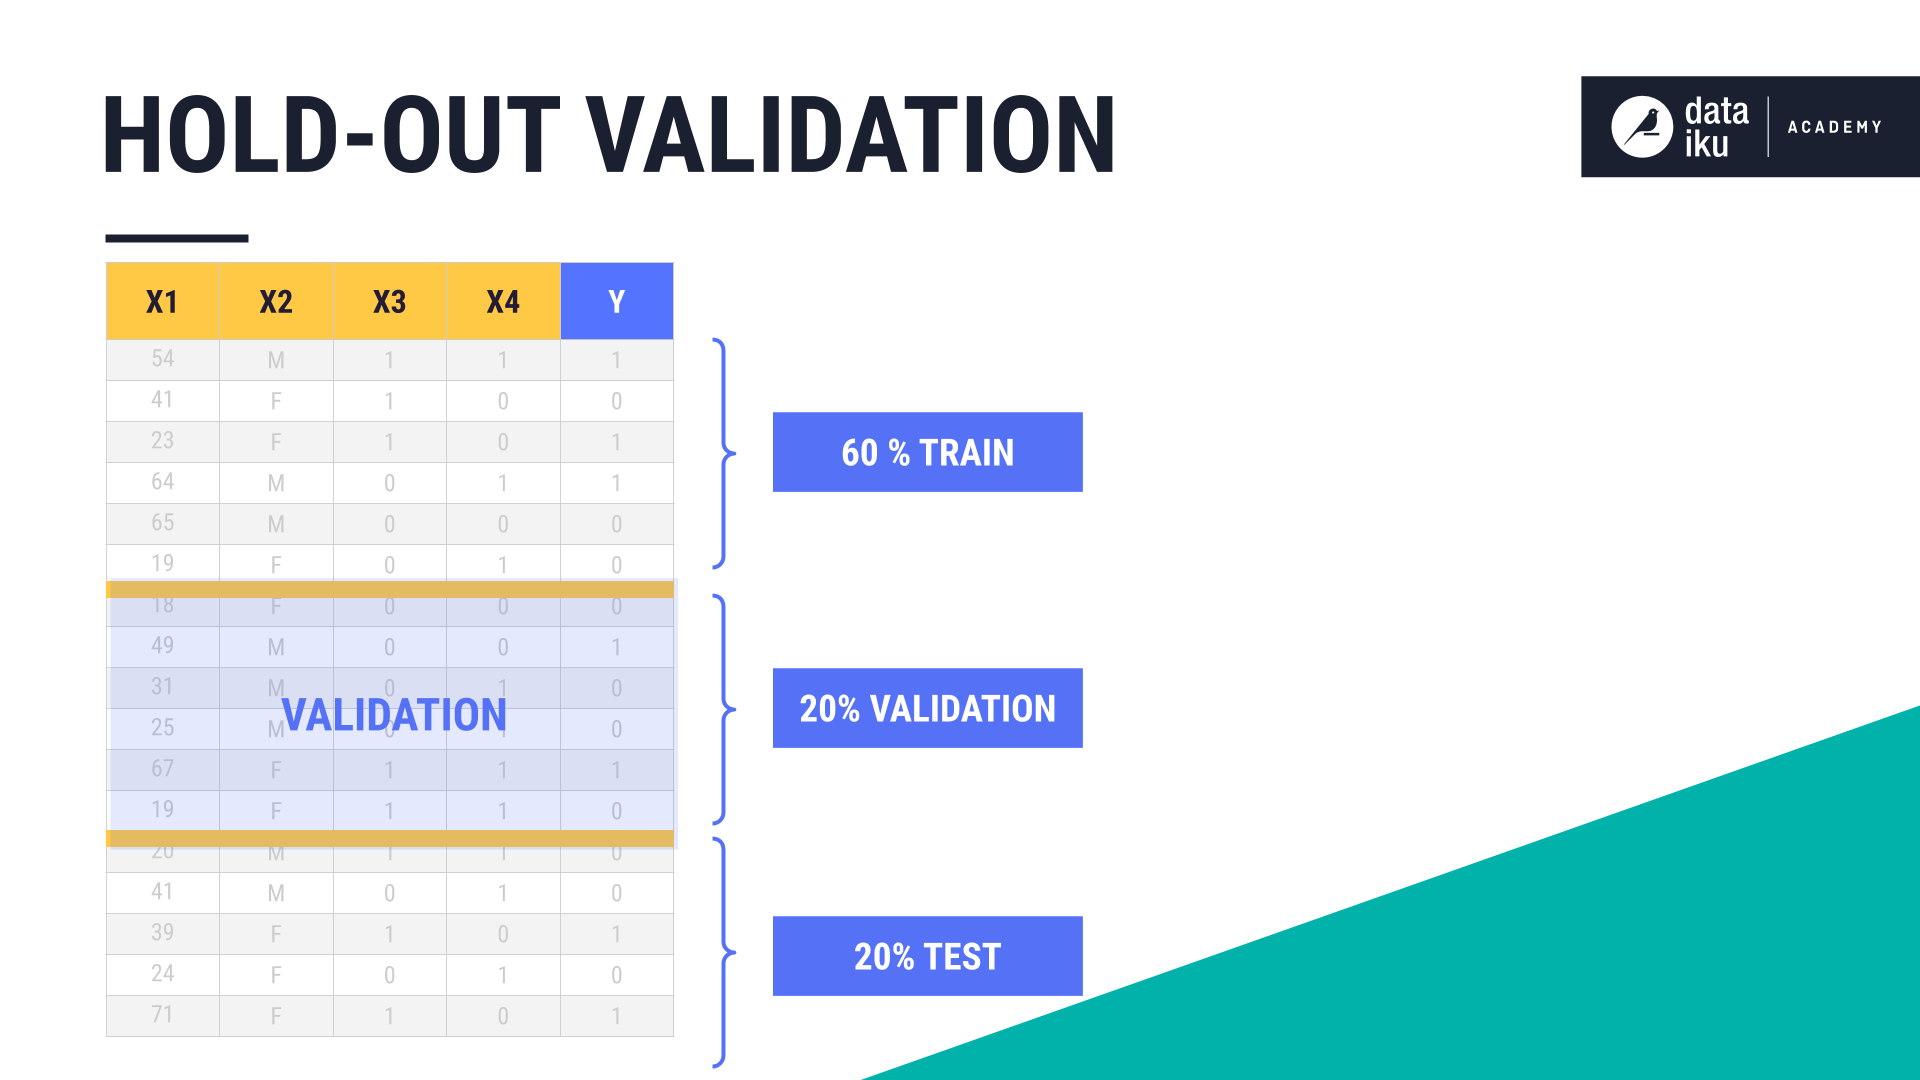 Data split for hold-out validation.